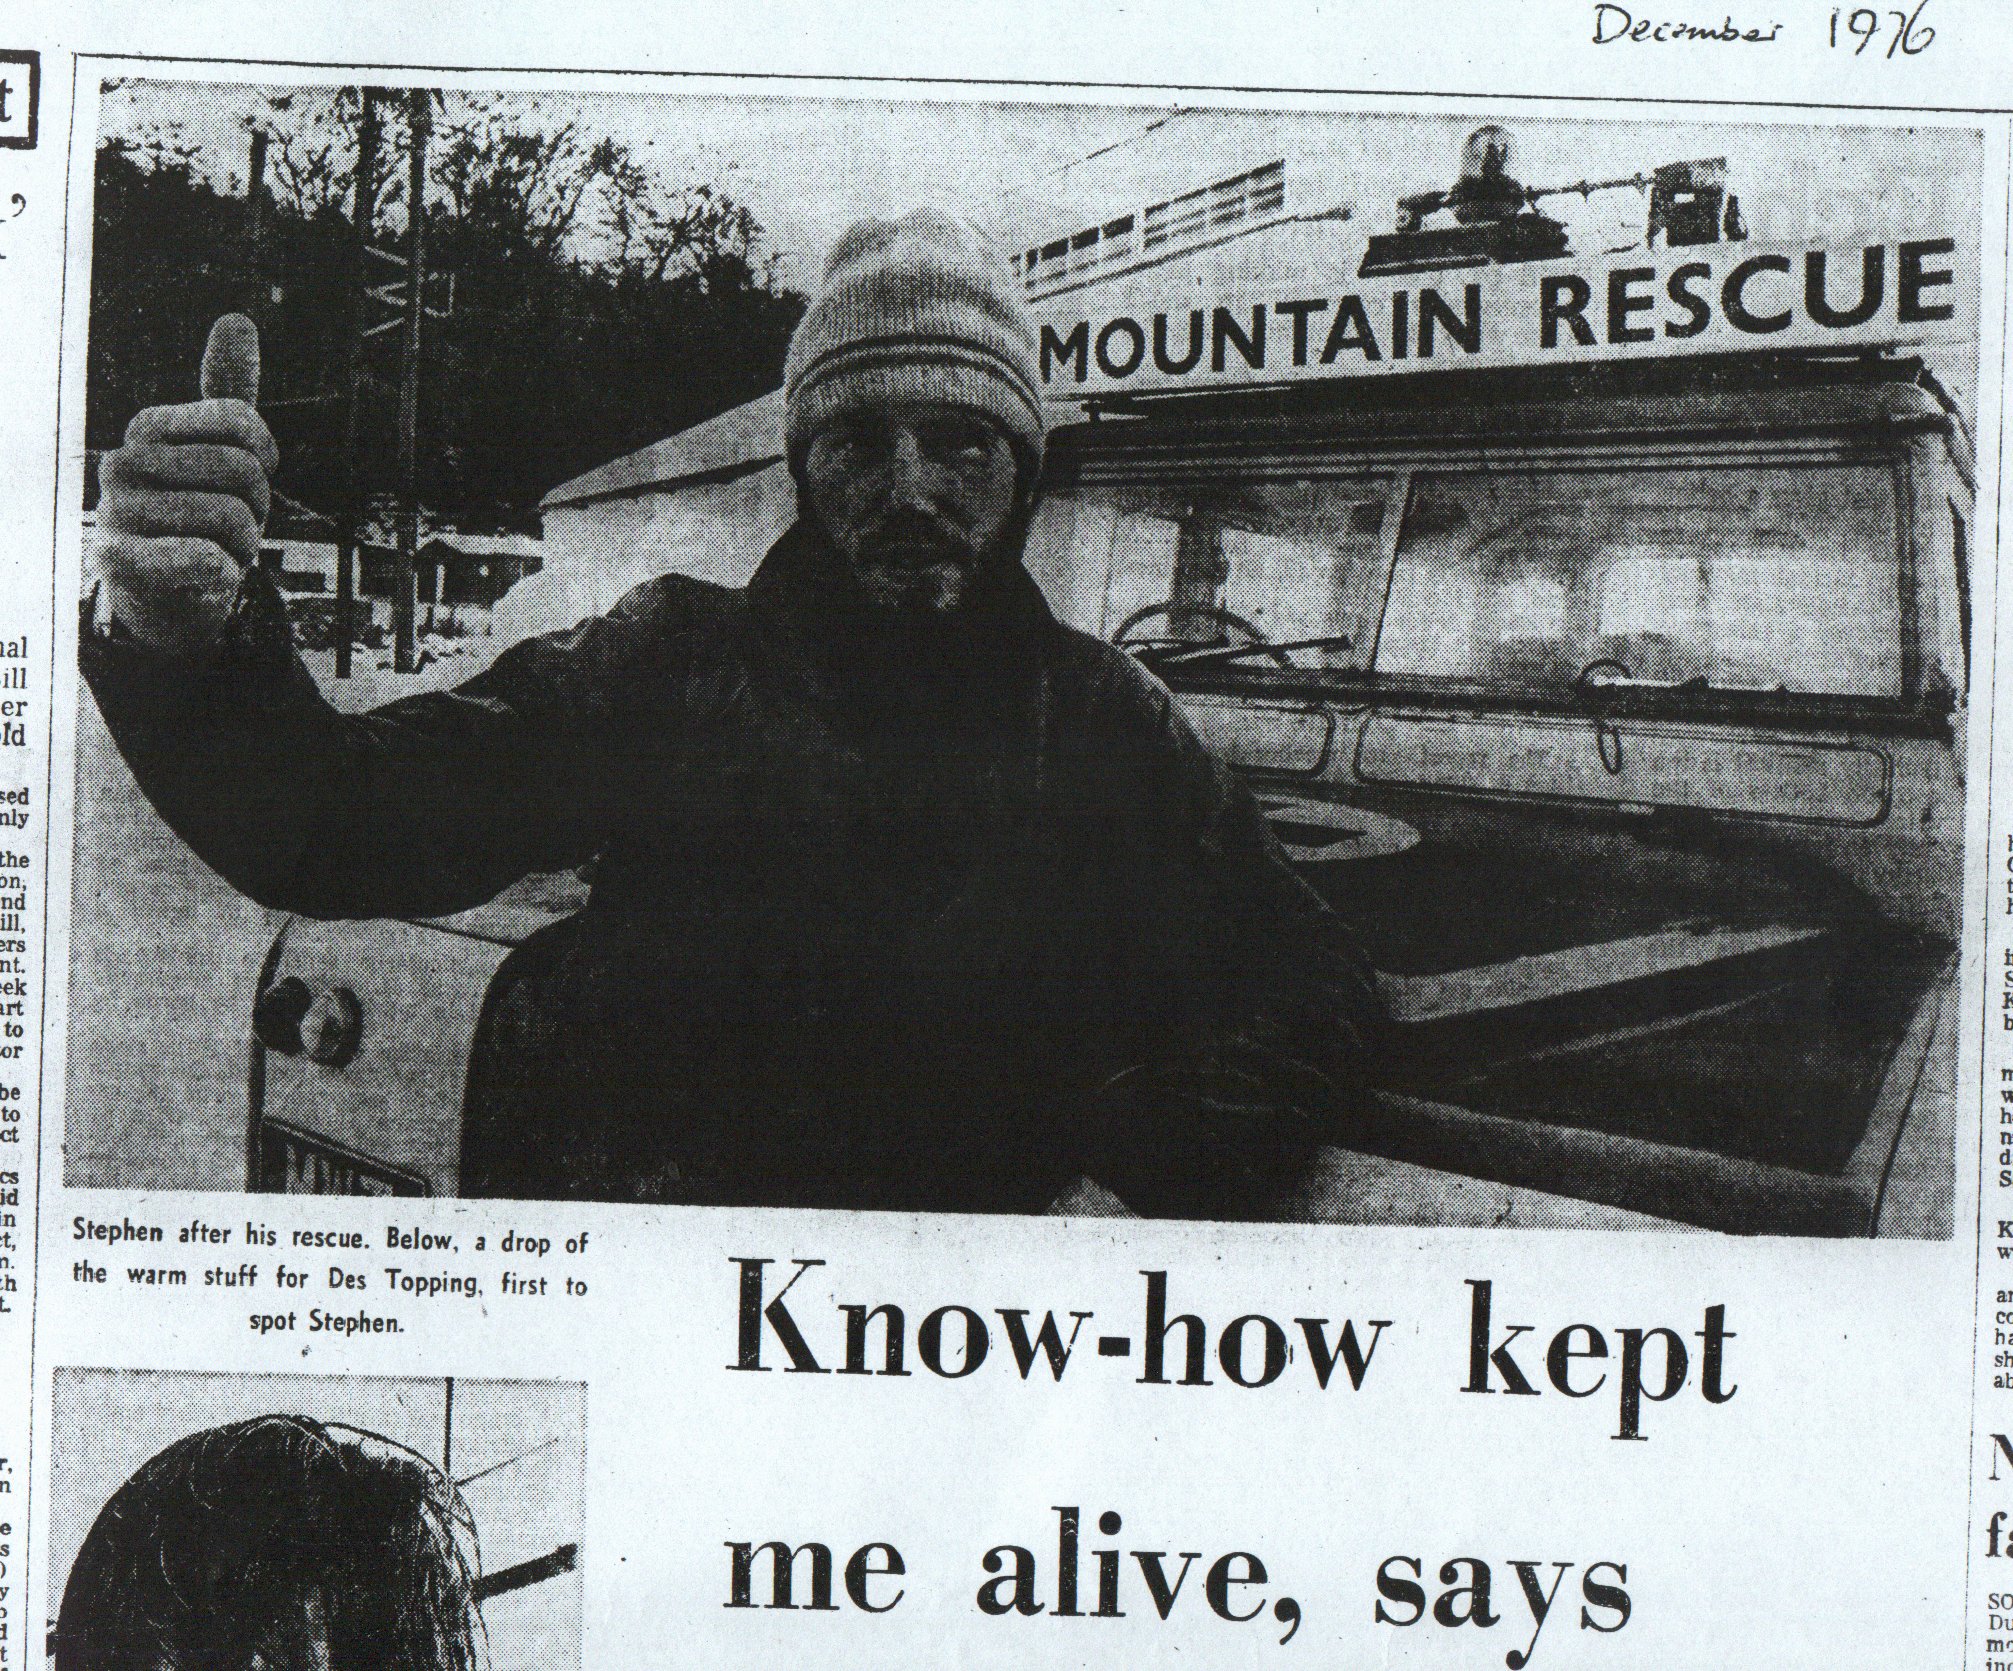 Know-how keps me alive says fell ordeal victim
Photo: Stephen Jones, Mickle Fell, snow, callout, successful   